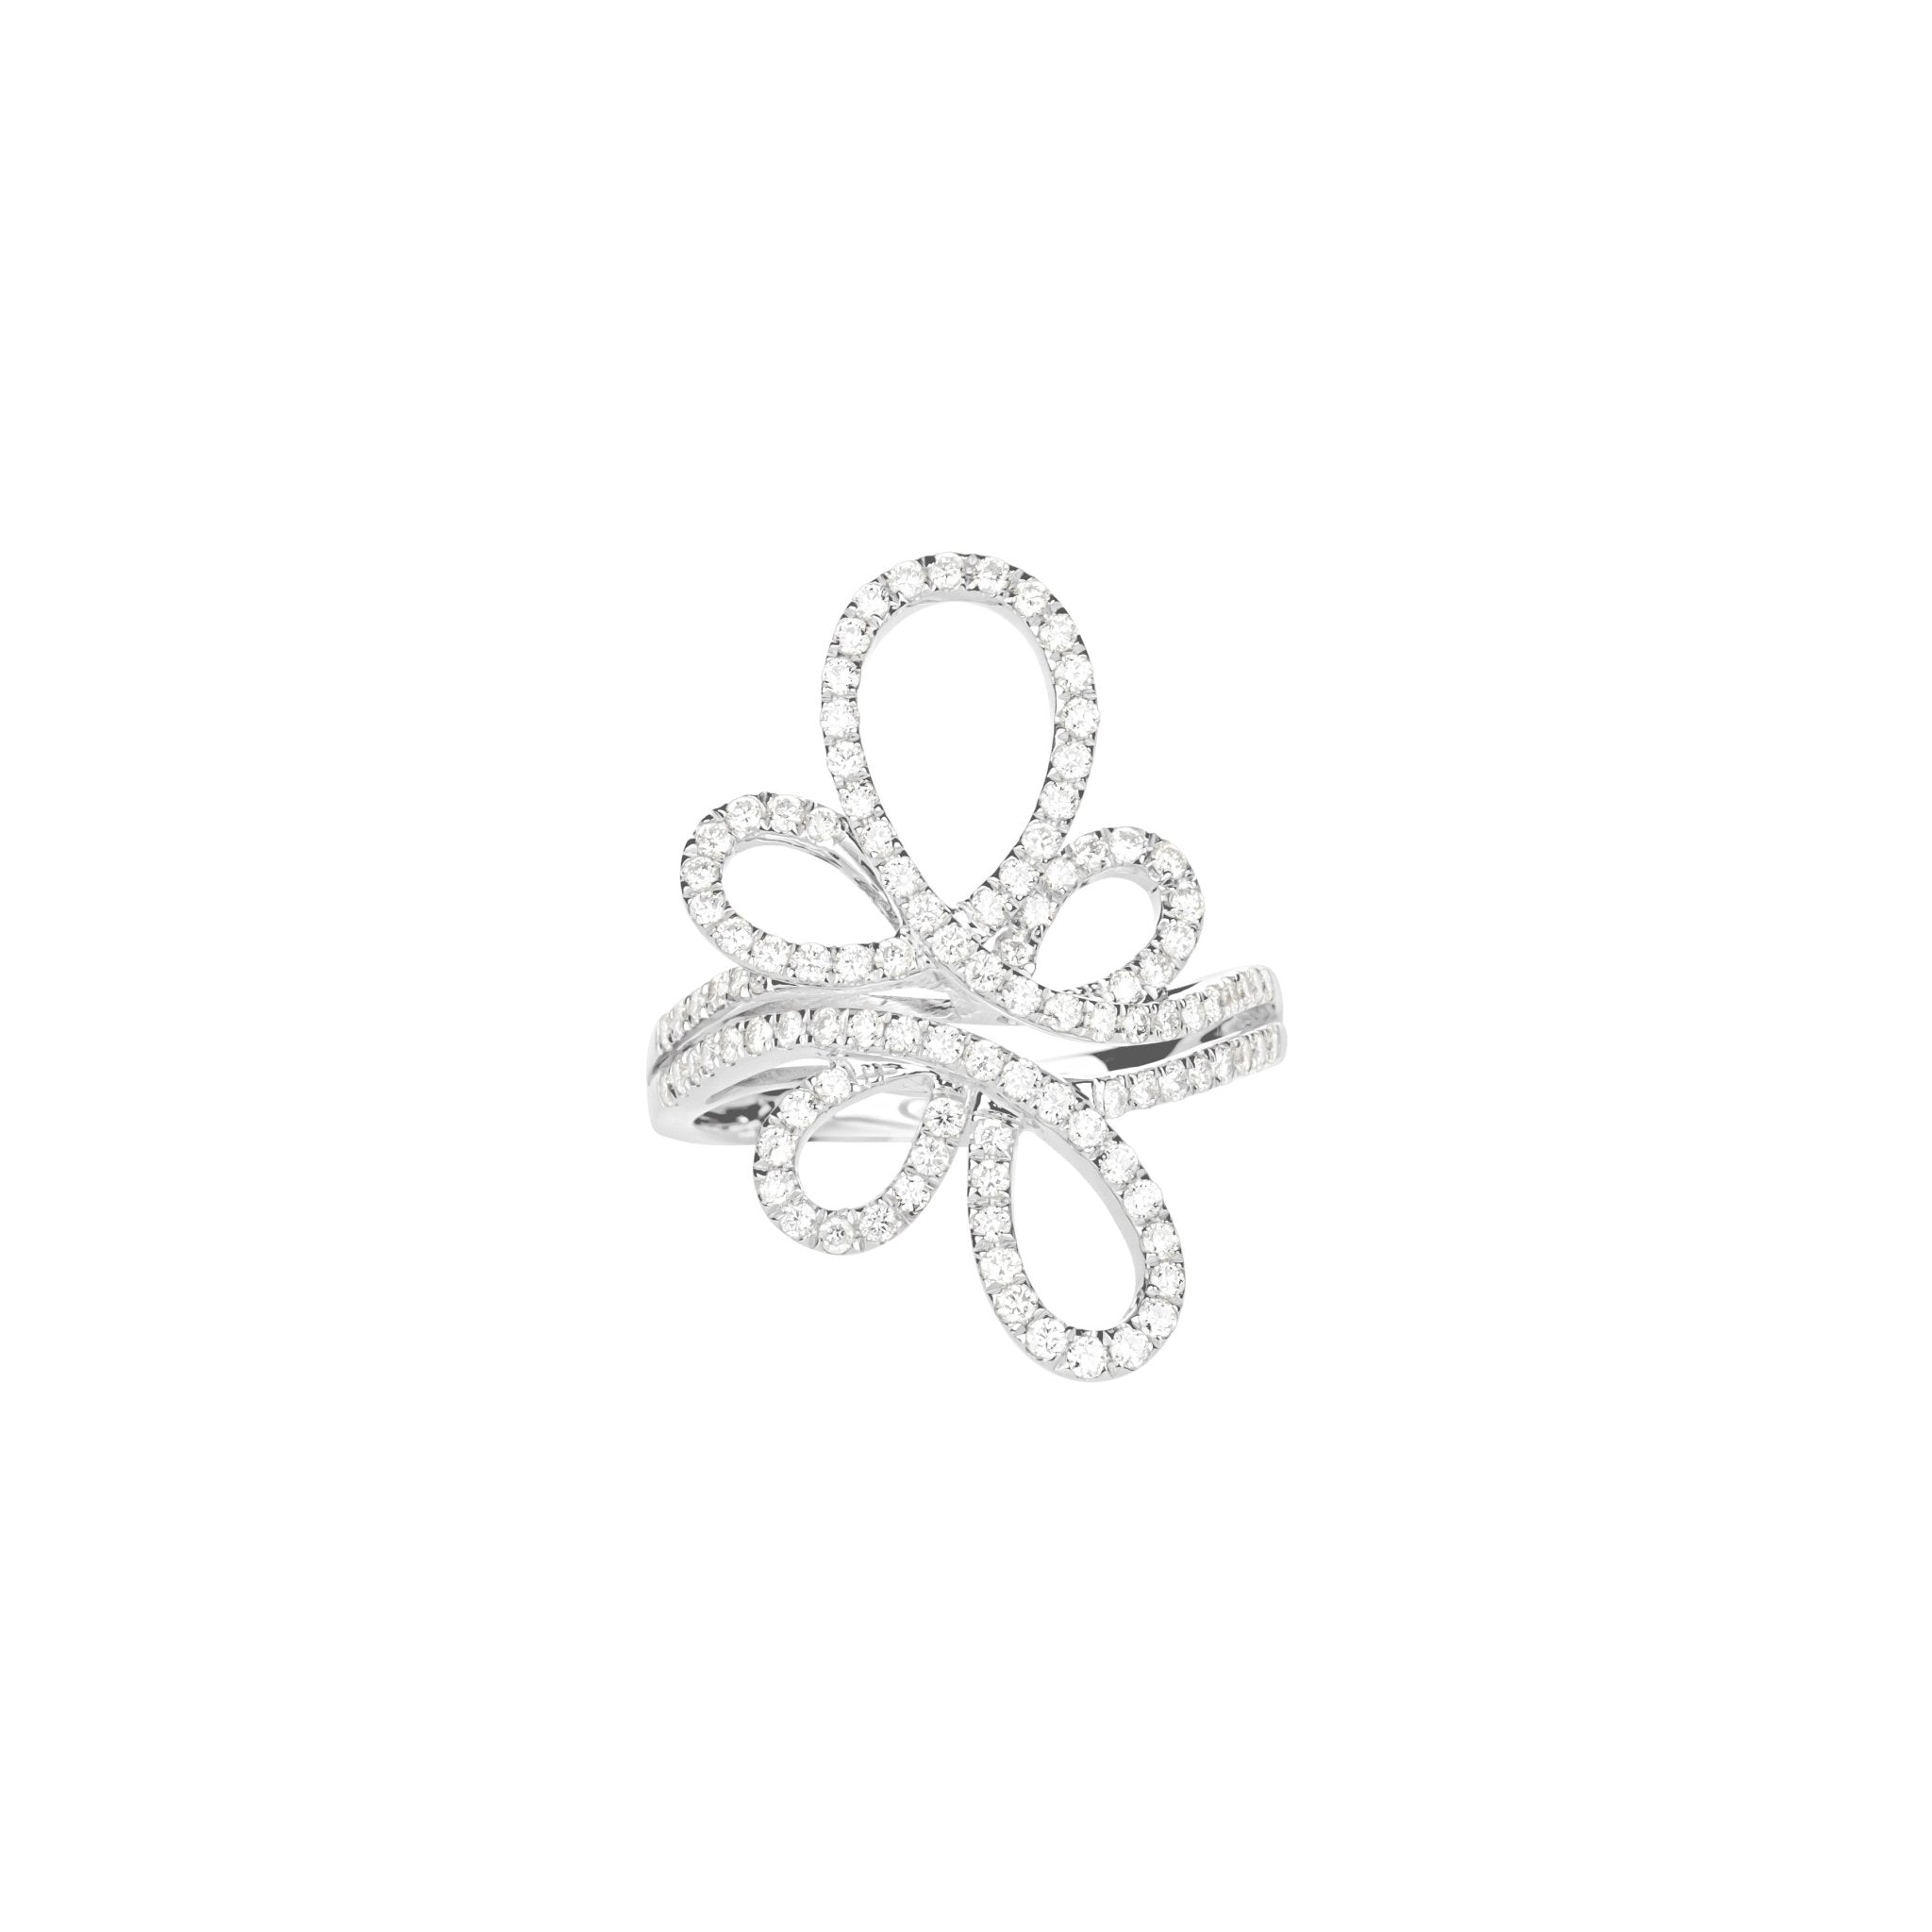 Abstract Diamond Flower Cocktail Ring Rings Estella Collection #product_description# 17232 14k Cocktail Ring Diamond #tag4# #tag5# #tag6# #tag7# #tag8# #tag9# #tag10# 6